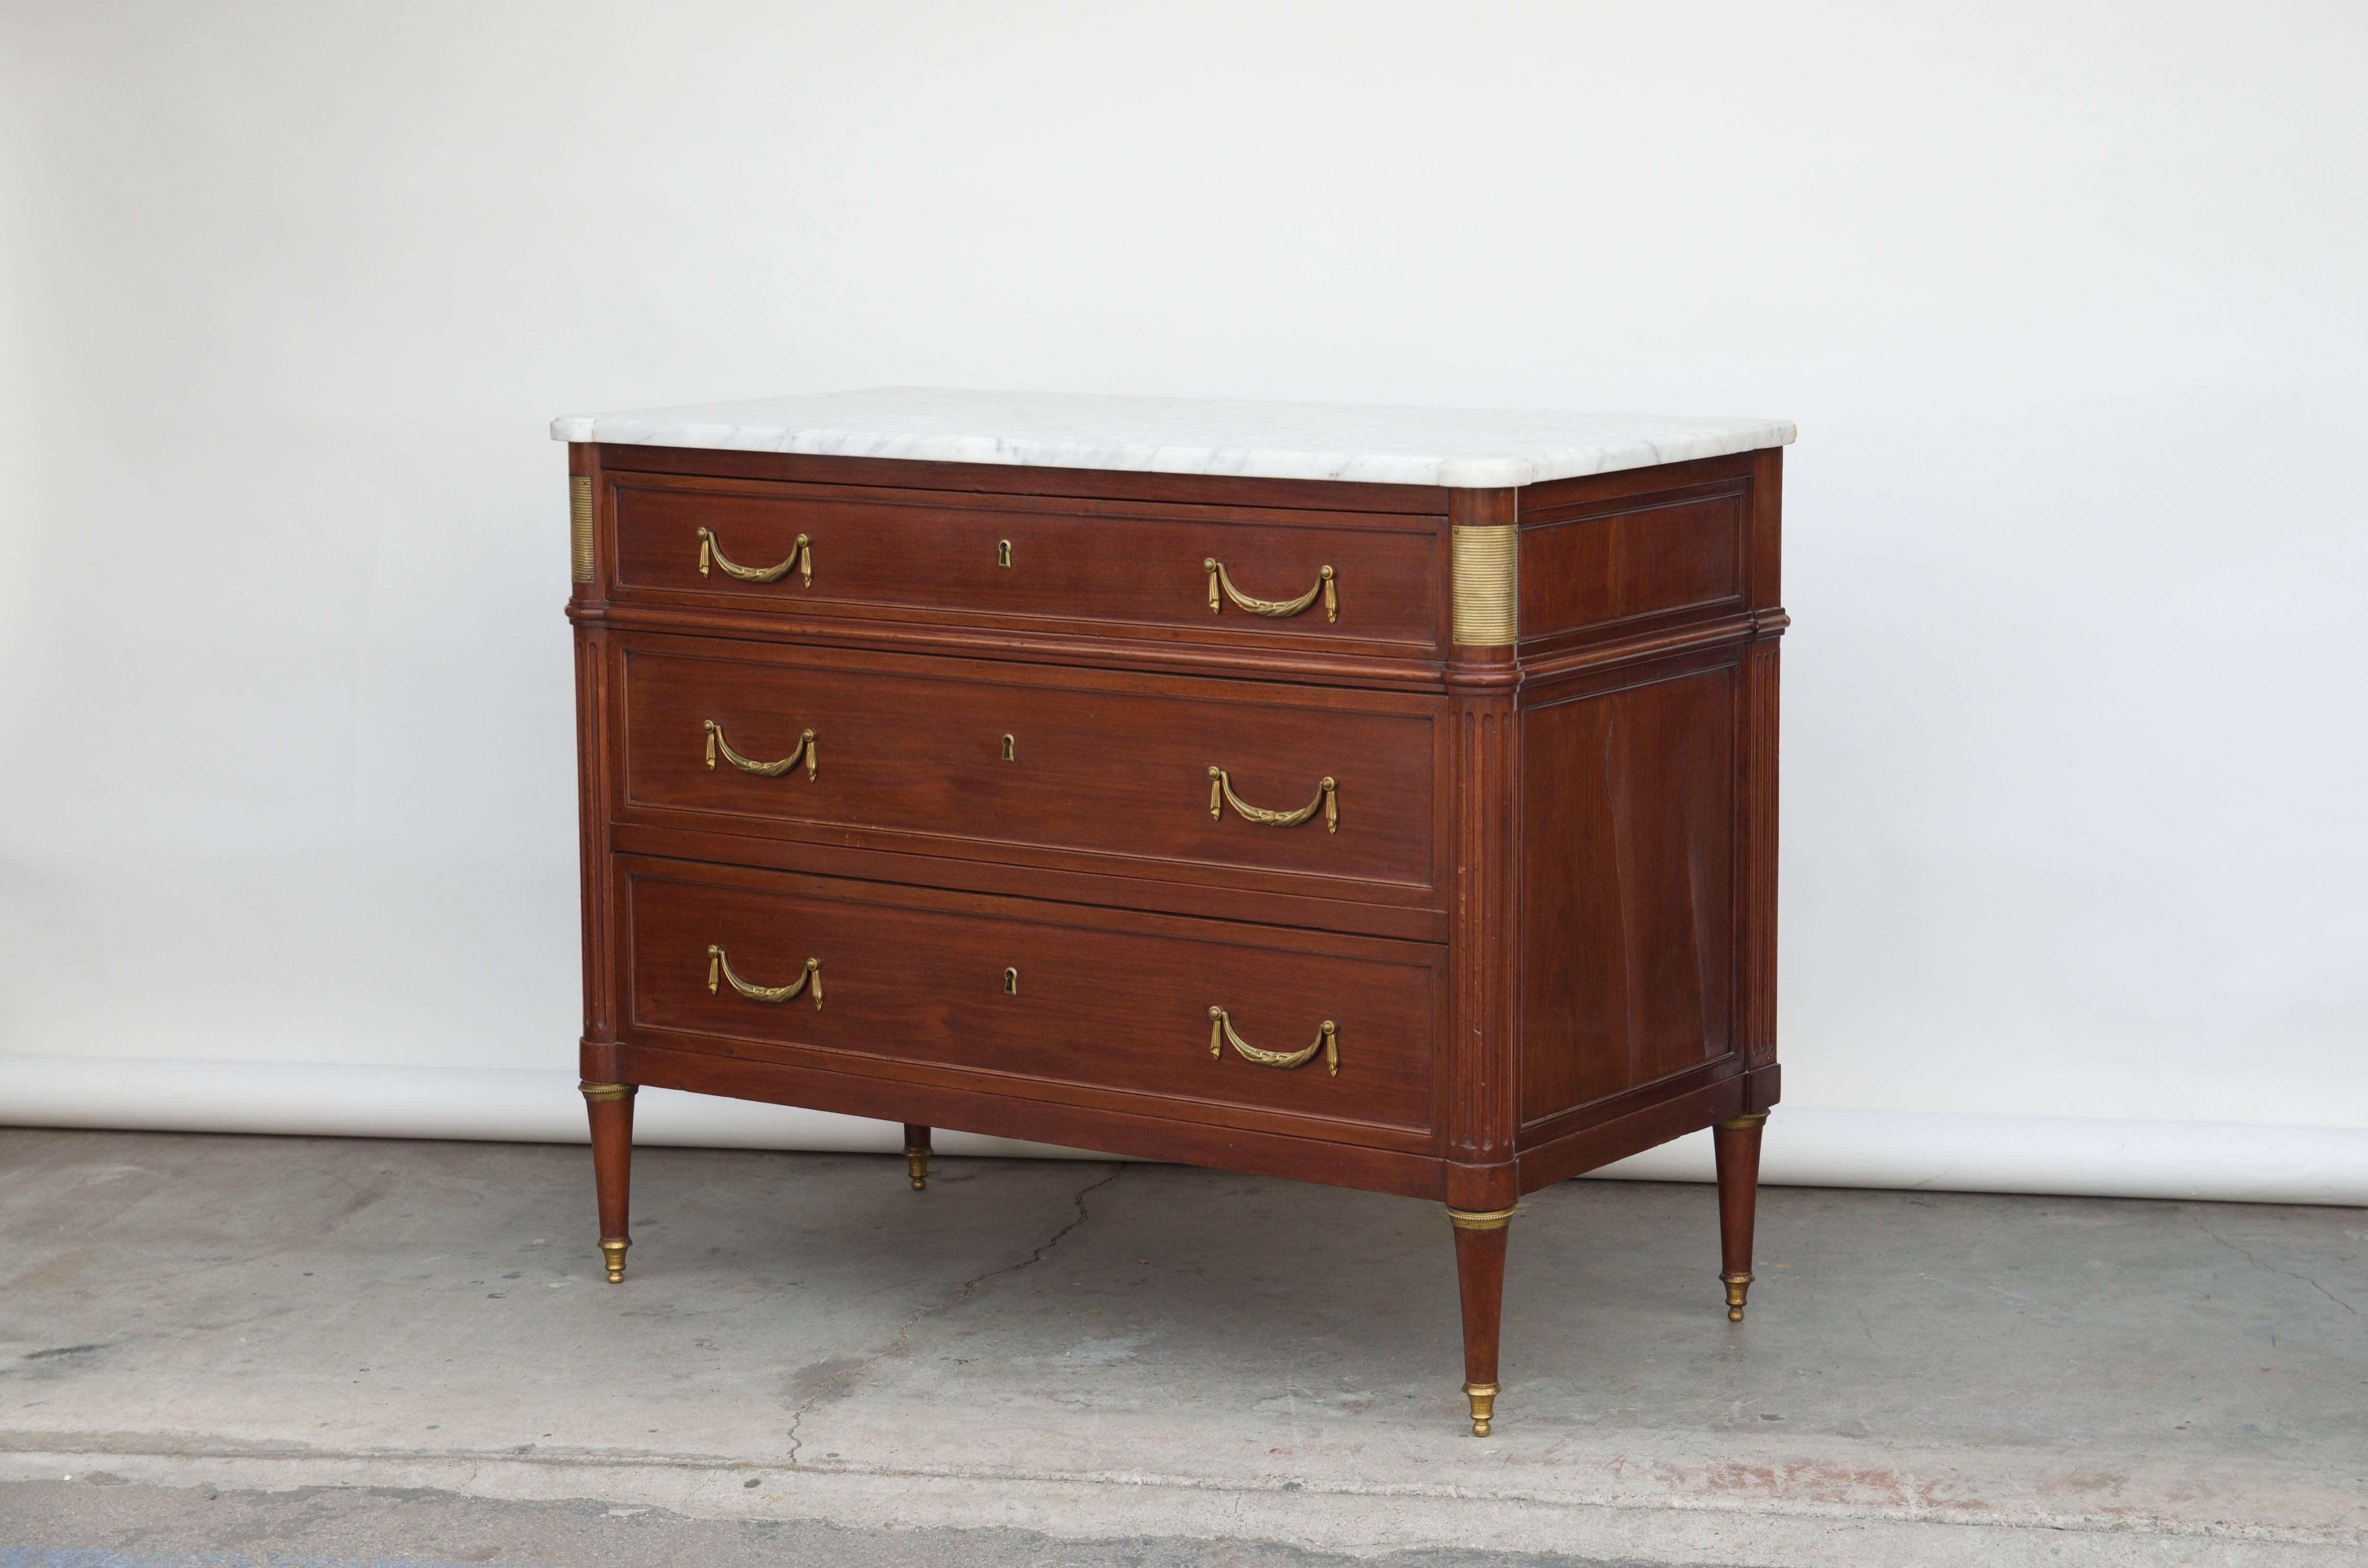 Gilt Chic Louis XVI-Style Neoclassical Commode For Sale